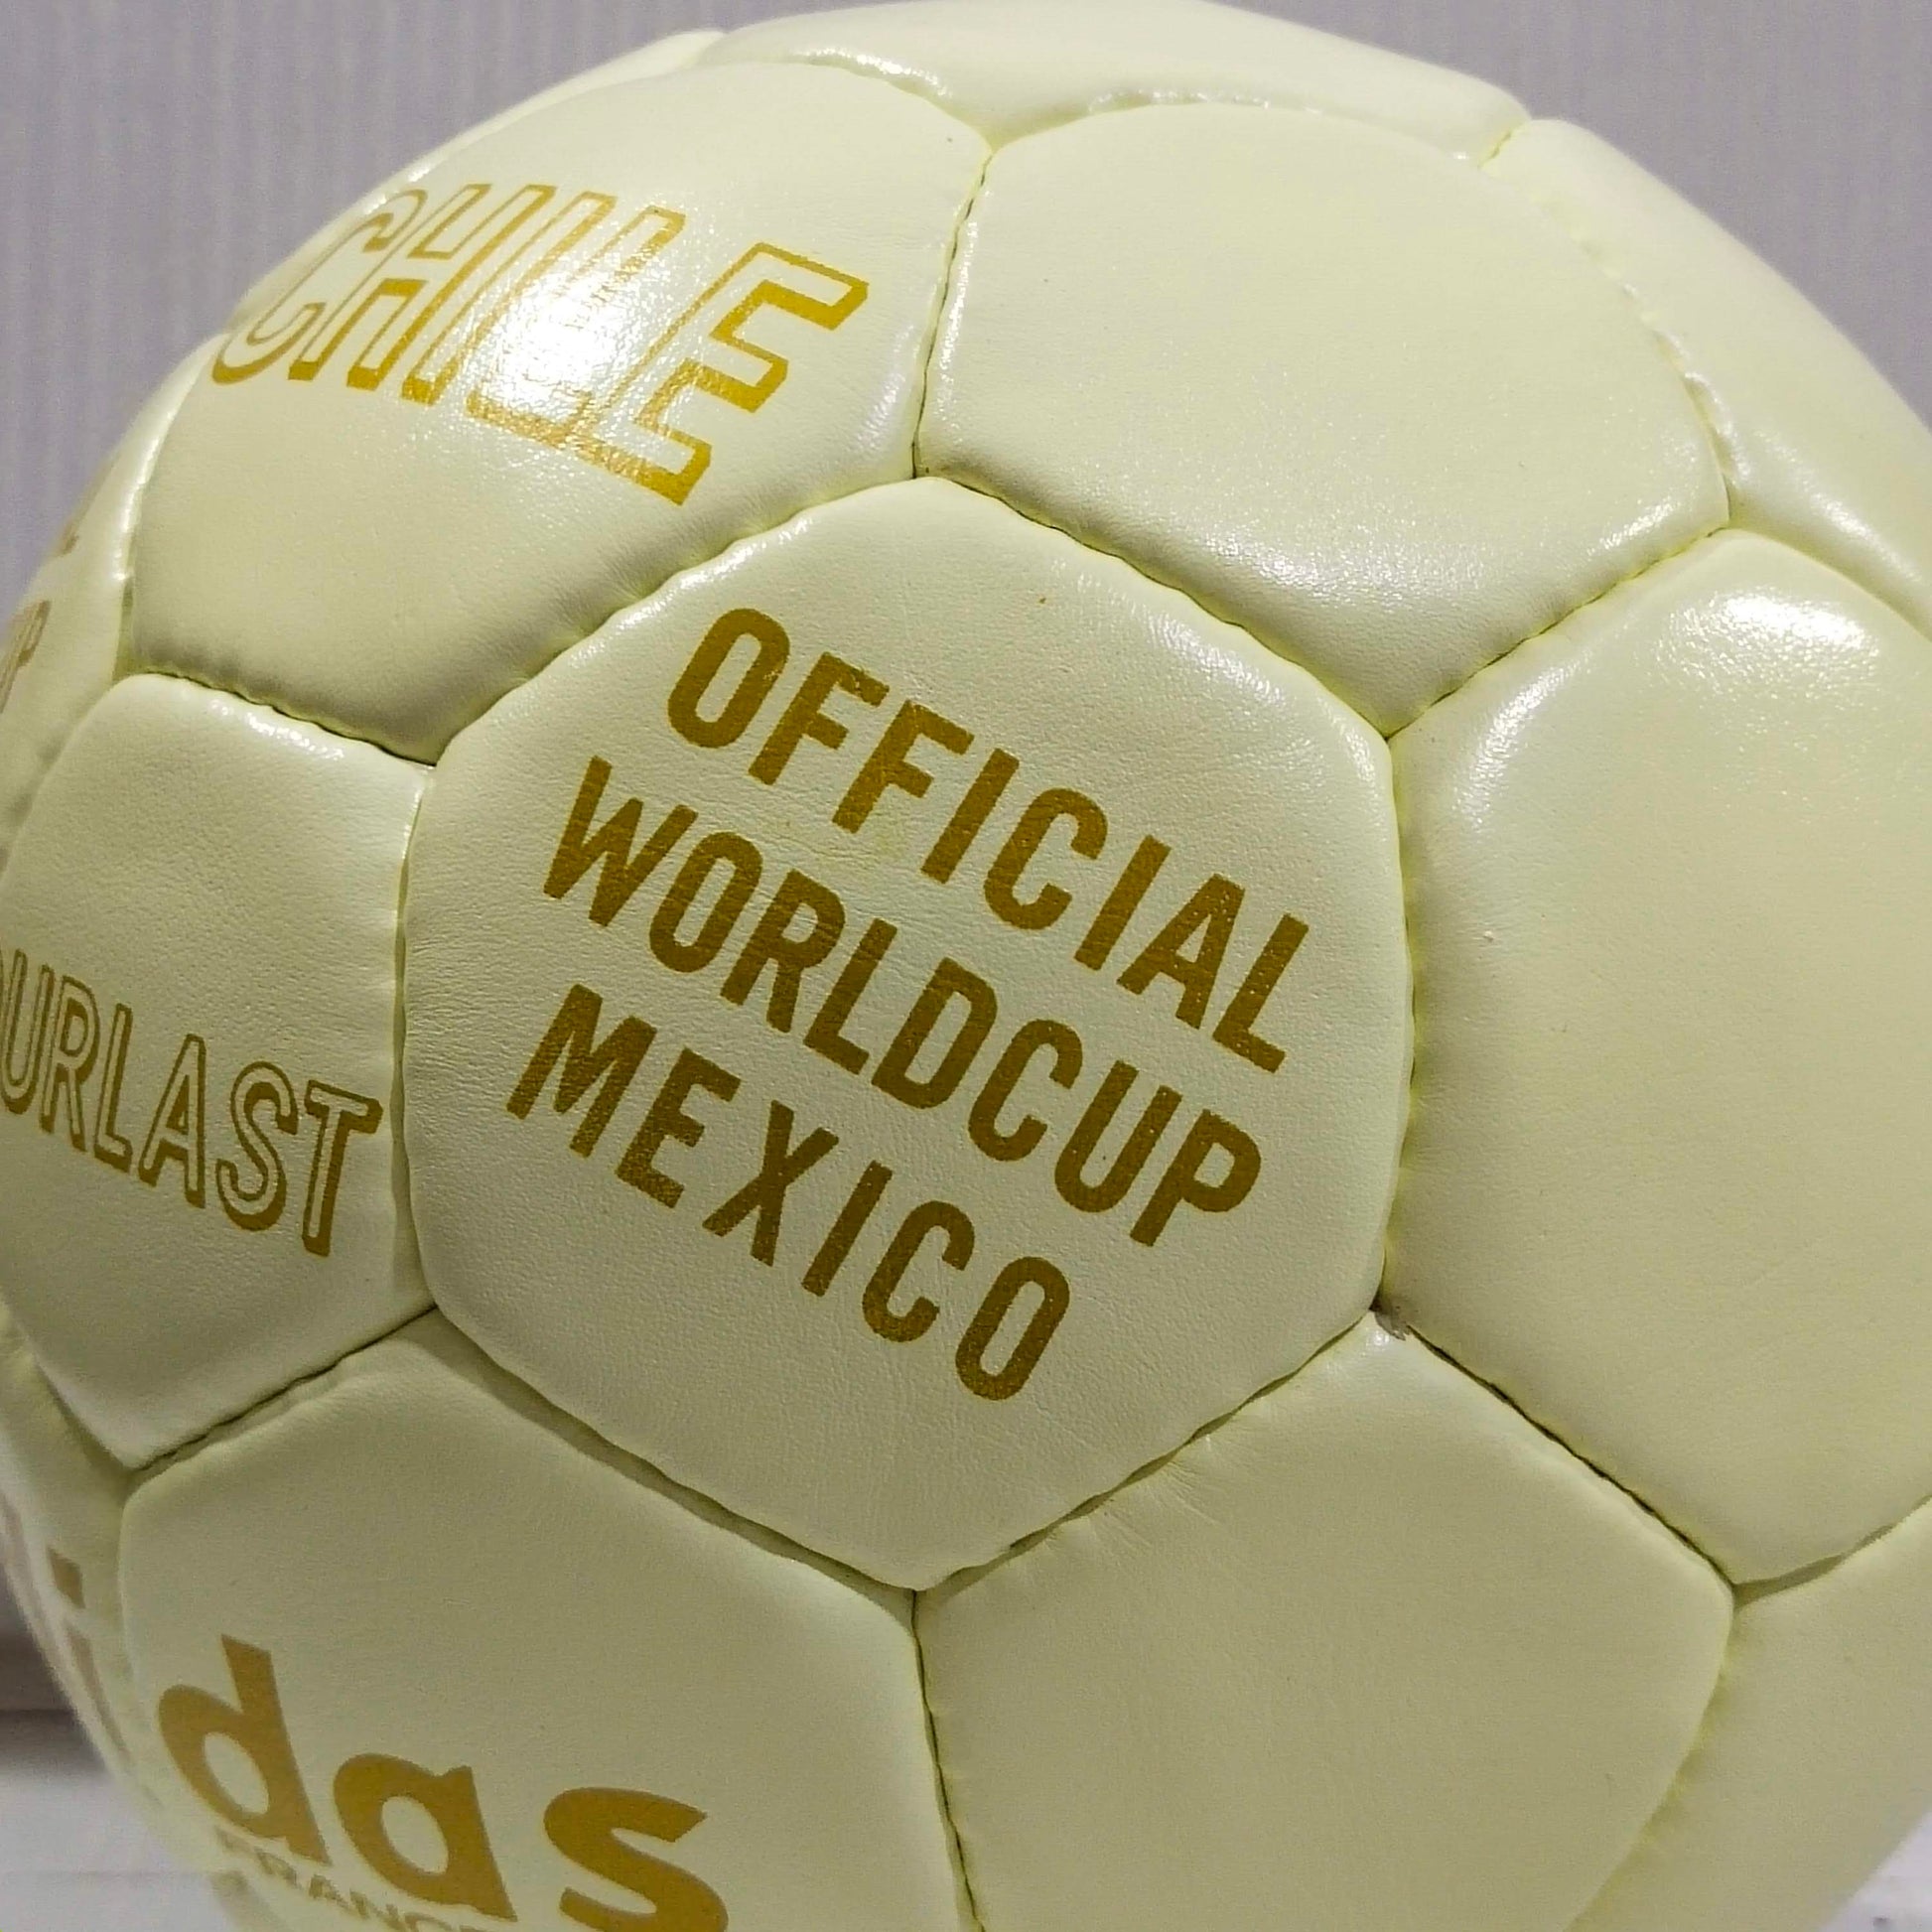 Adidas Chile Durlast | 1970 | FIFA World Cup Ball | Genuine Leather | SIZE 5 04